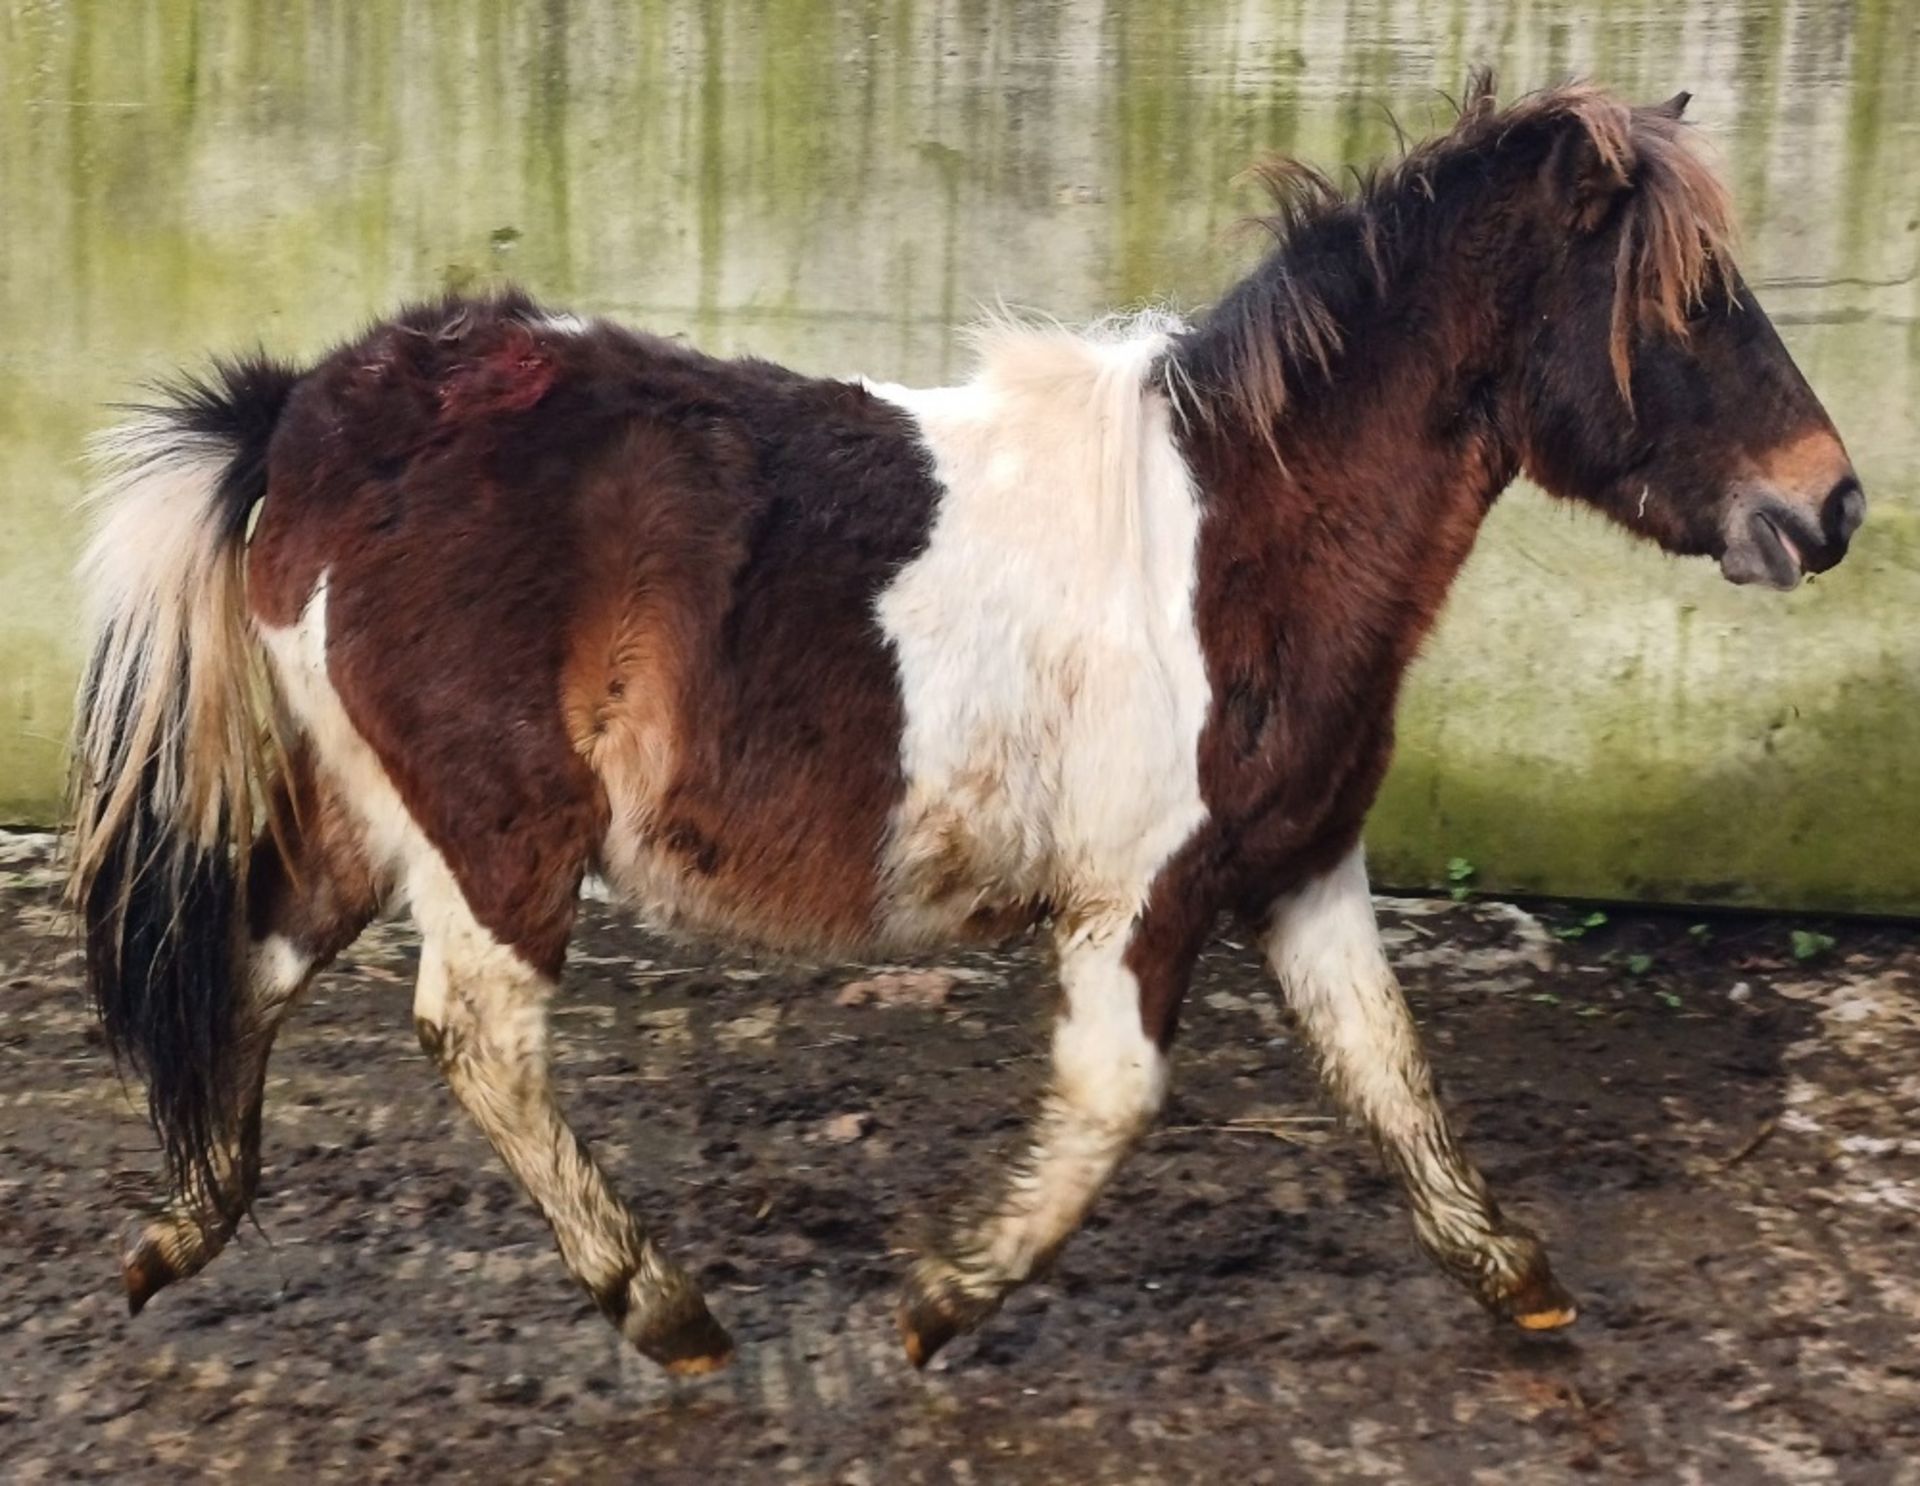 'GODSWORTHY SPICE' DARTMOOR HILL PONY SKEWBALD COLT APPROX 18 MONTHS OLD - Image 6 of 12